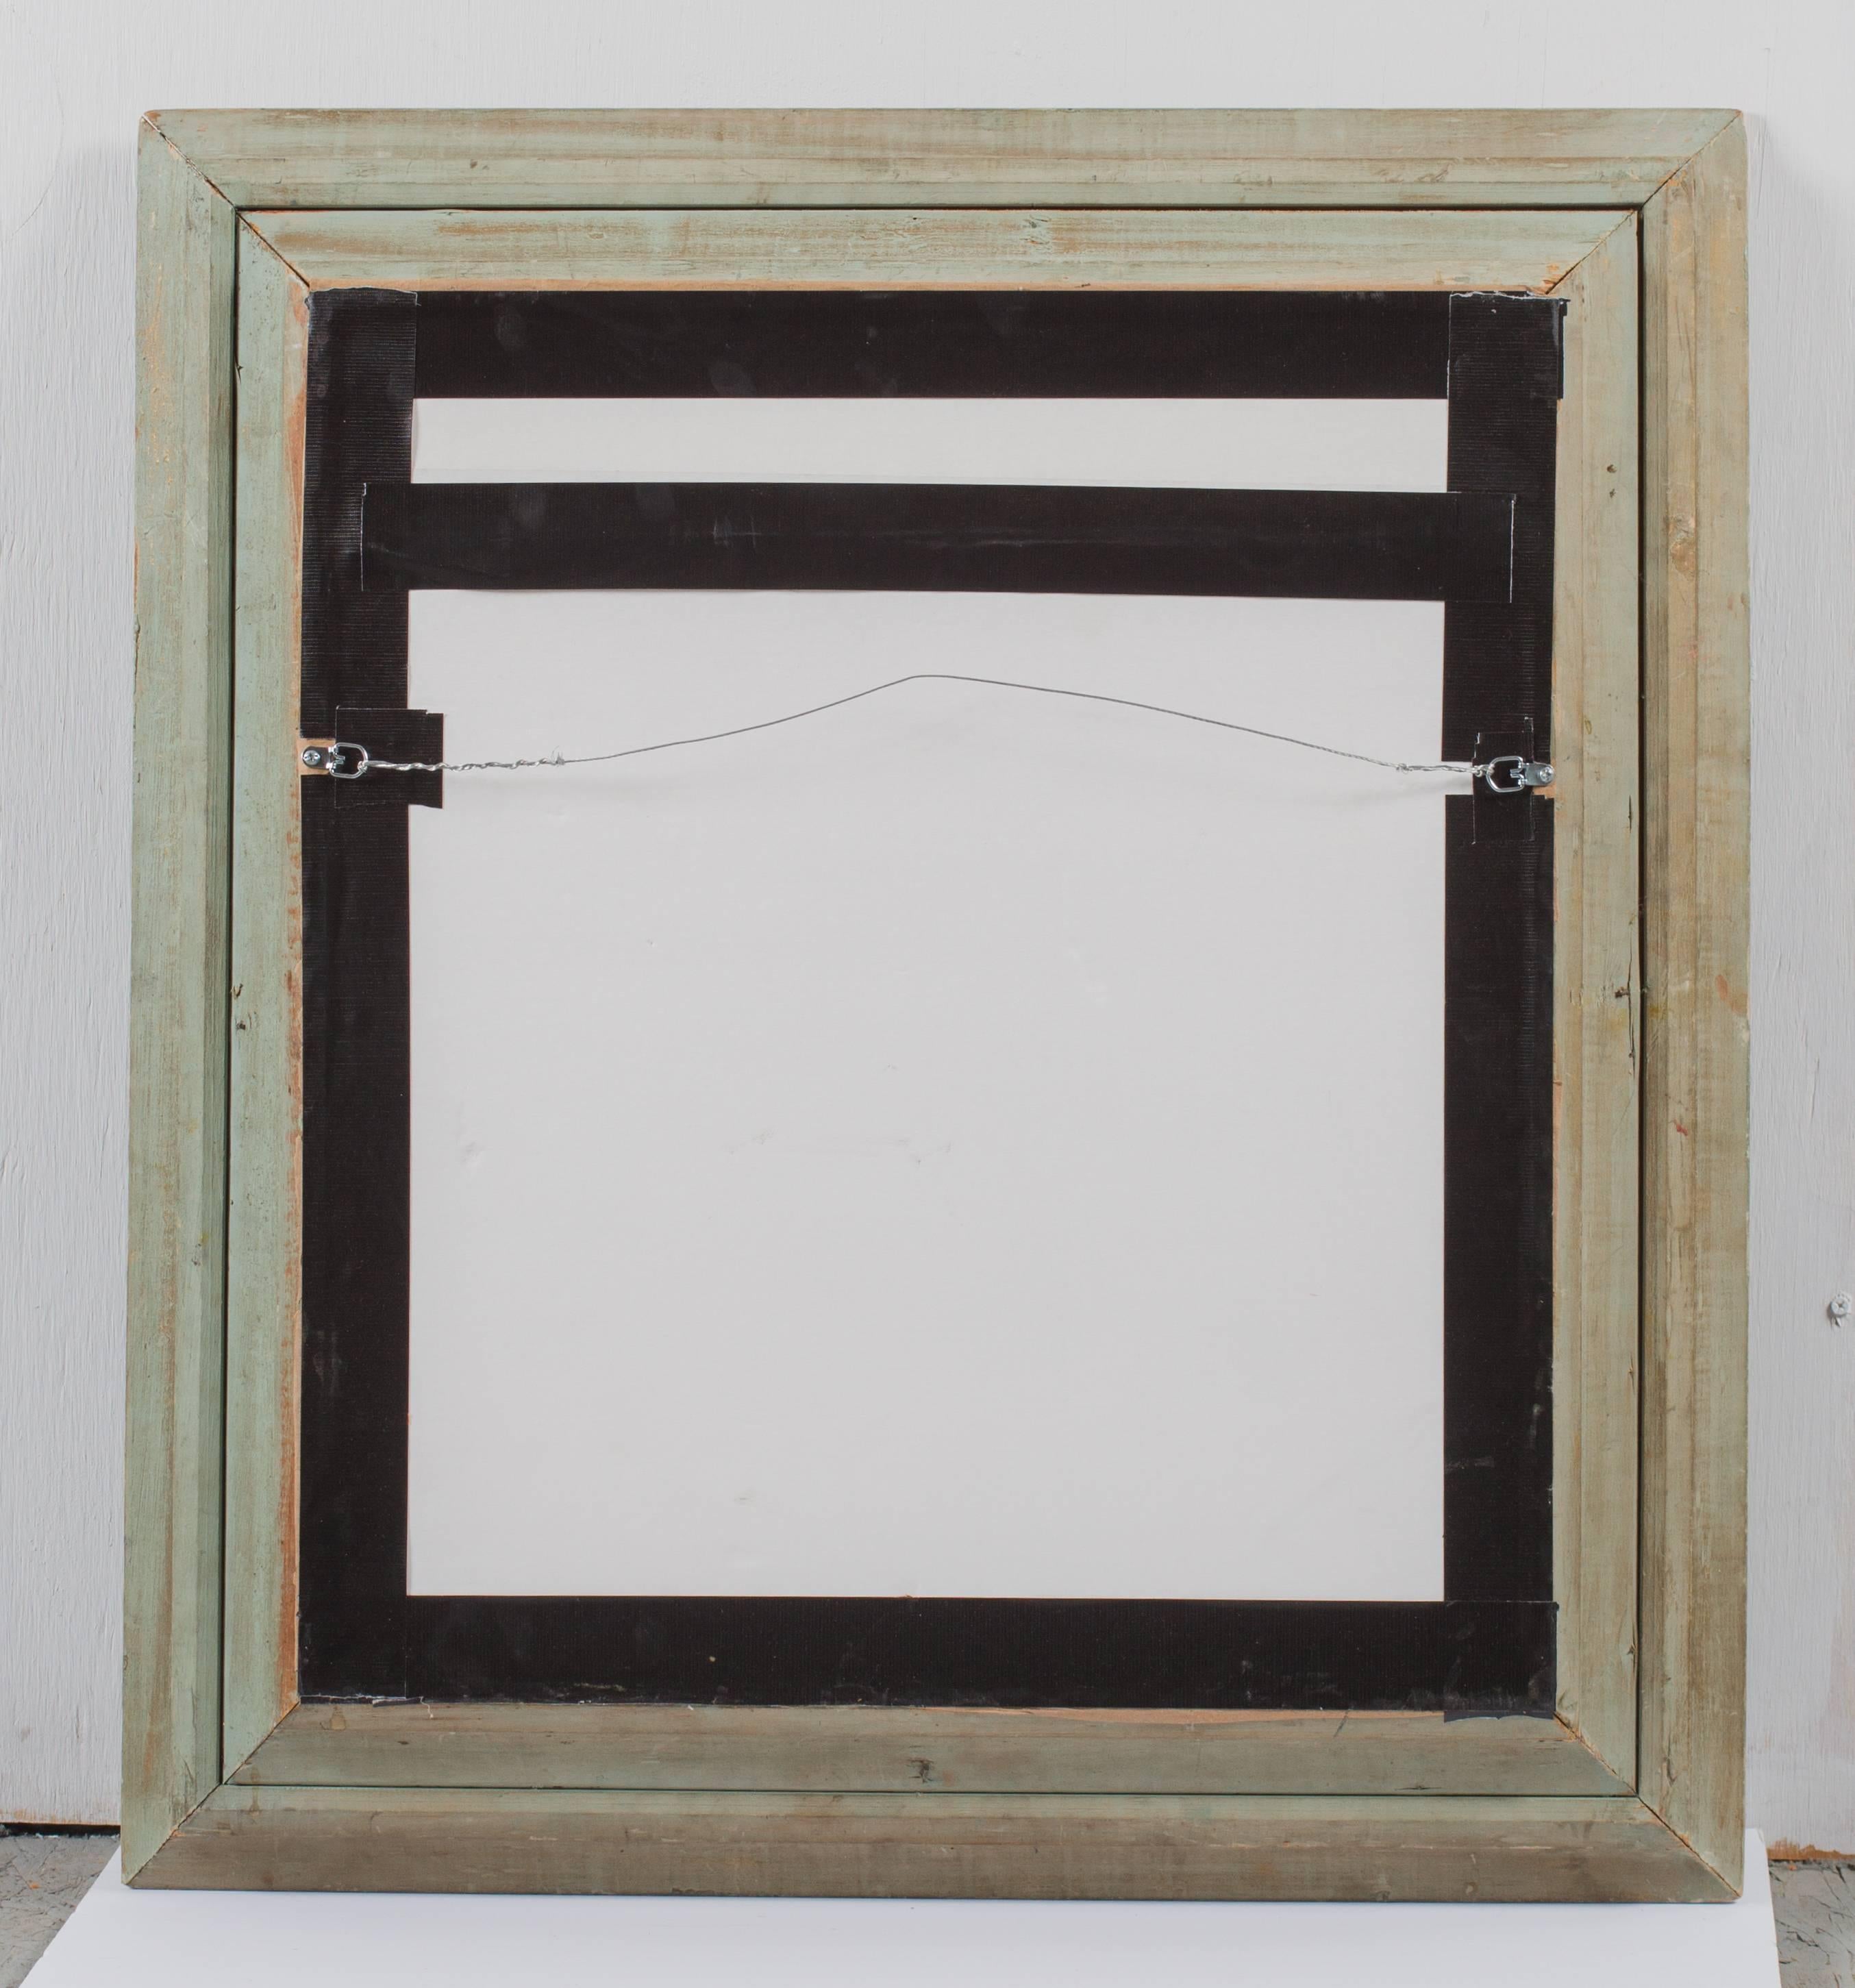 graphite and acrylic on paper in vintage engraved, gold and green tinted wood frame 
32 x 29 inches framed

This vertical, black, white and light blue graphite and acrylic drawing was inspired by the Russian Constructivist art movement. The work is